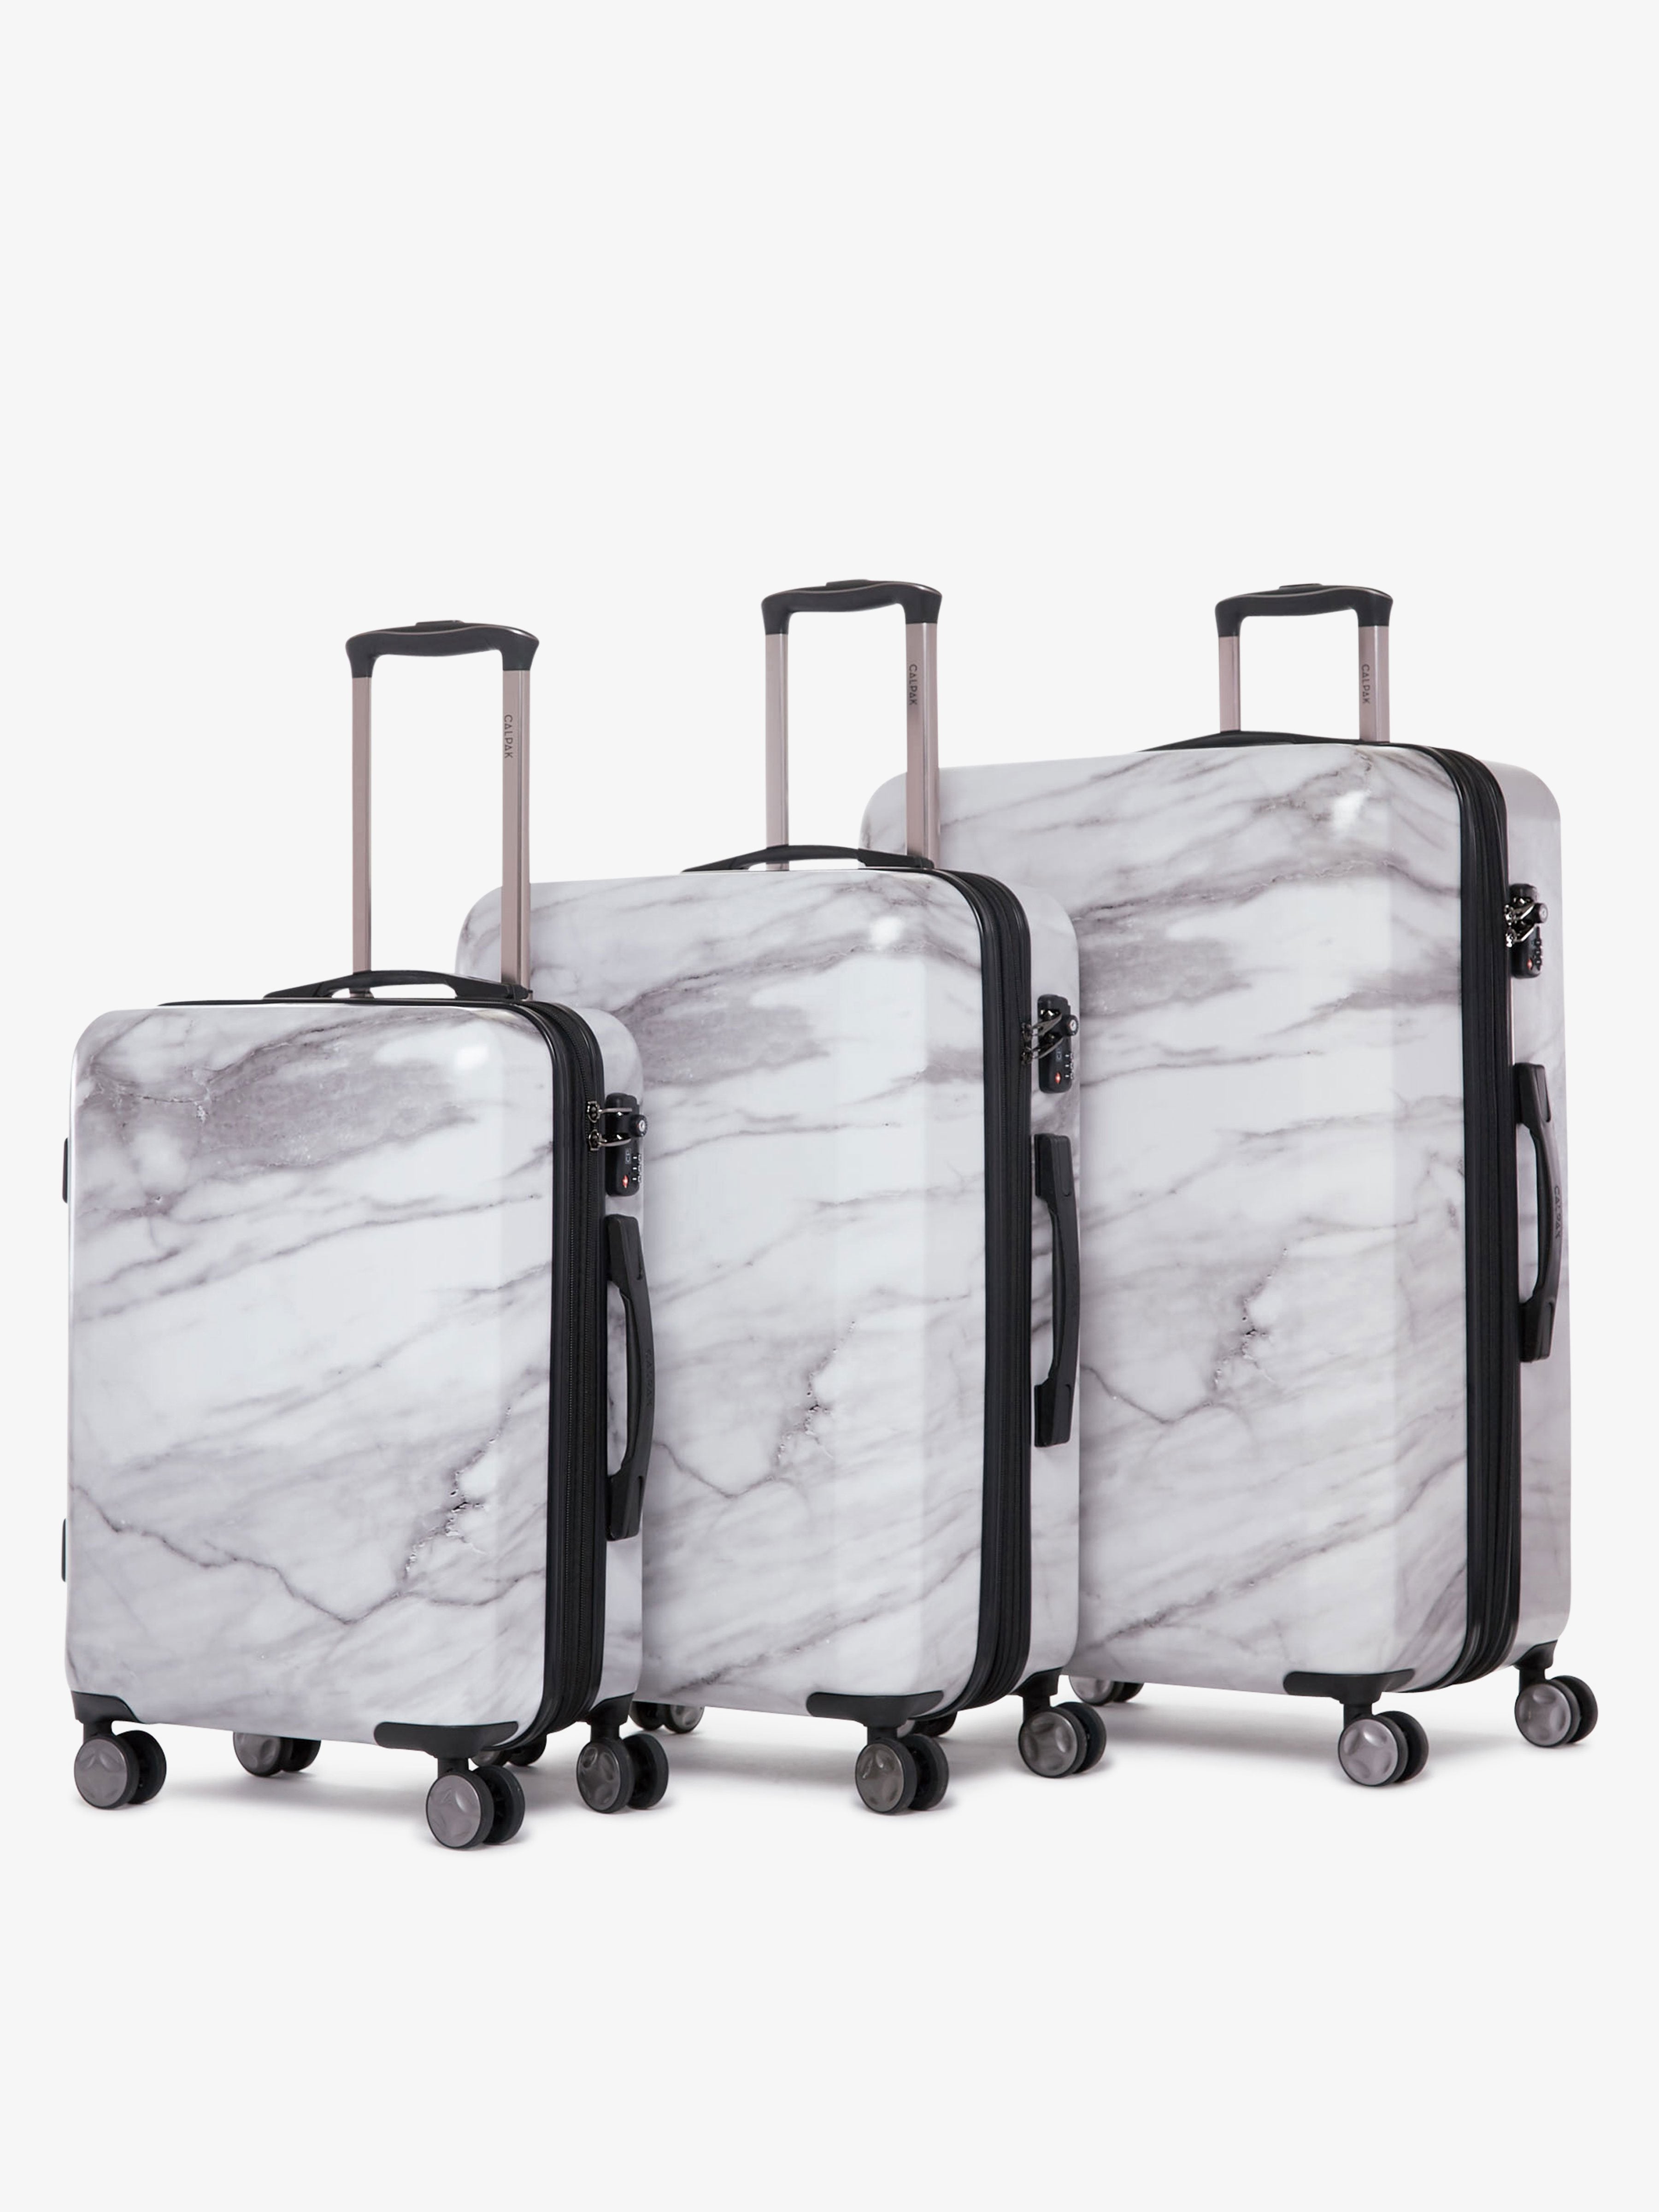 CALPAK Astyll white marble hard shell rolling carry on suitcase as a part of 3 piece luggage set